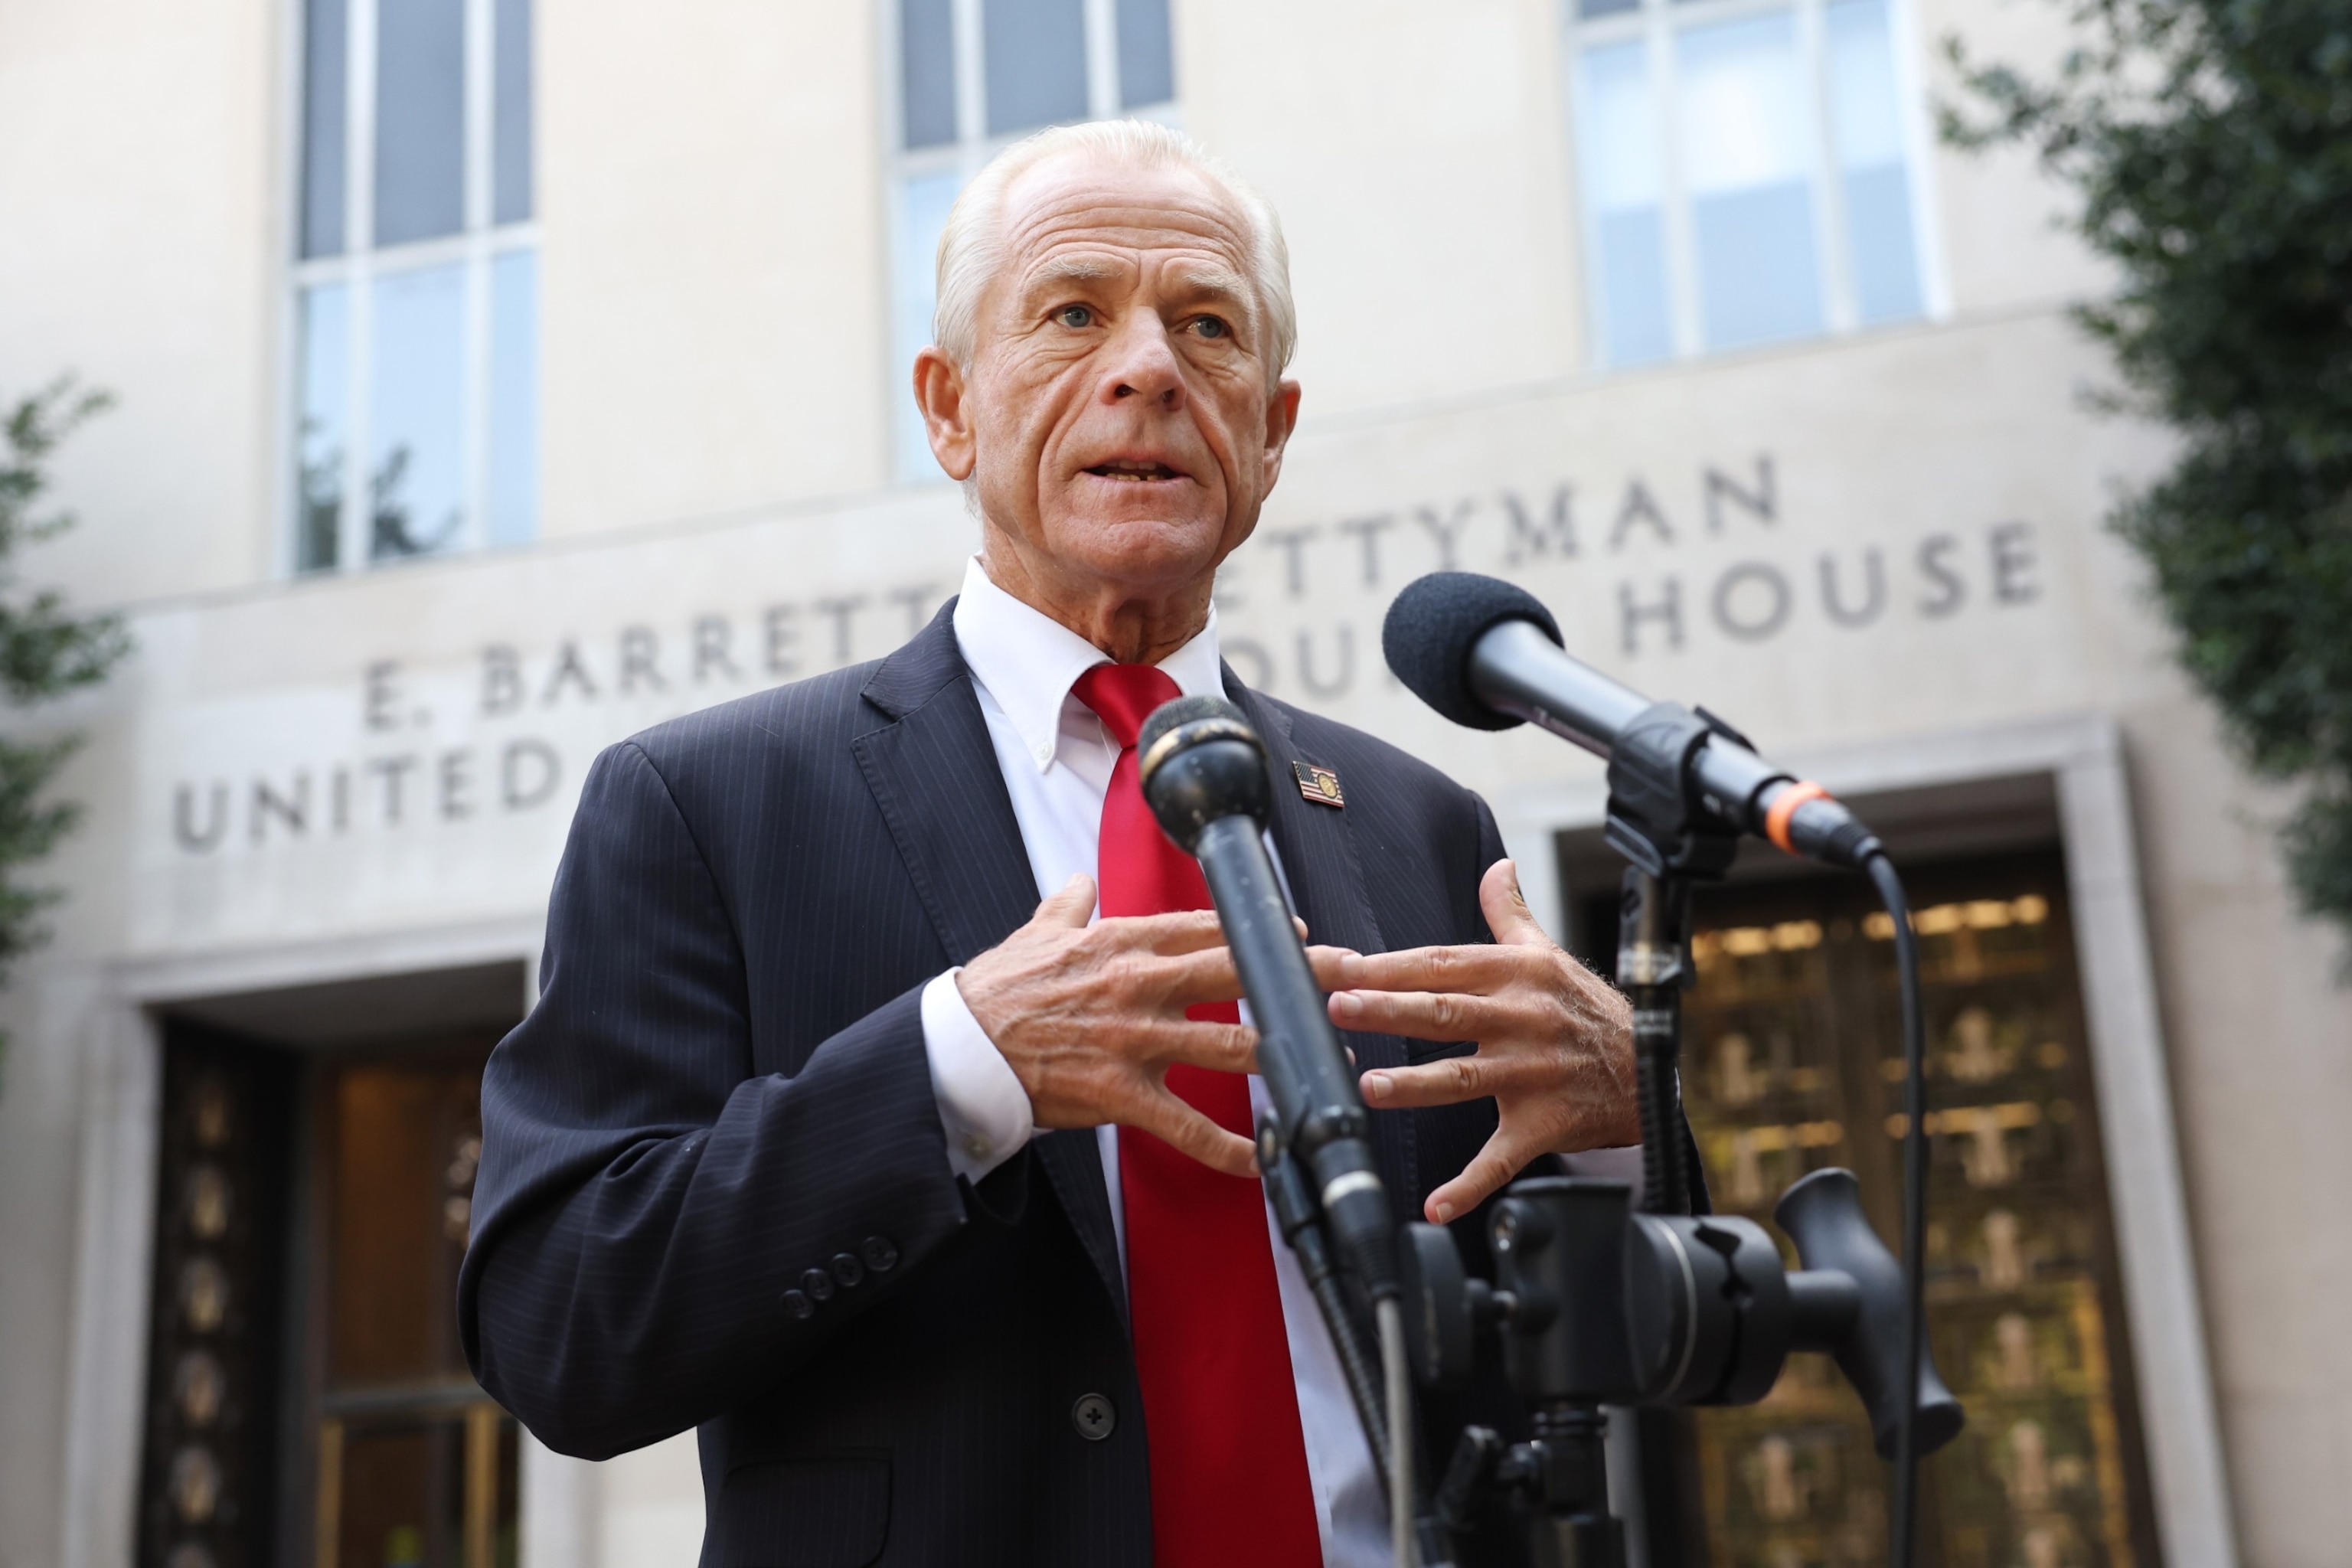 PHOTO: In this Sept. 7, 2023 file photo, Peter Navarro, an advisor to former U.S. President Donald Trump, speaks to reporters as he arrives at the E. Barrett Prettyman Courthouse in Washington.